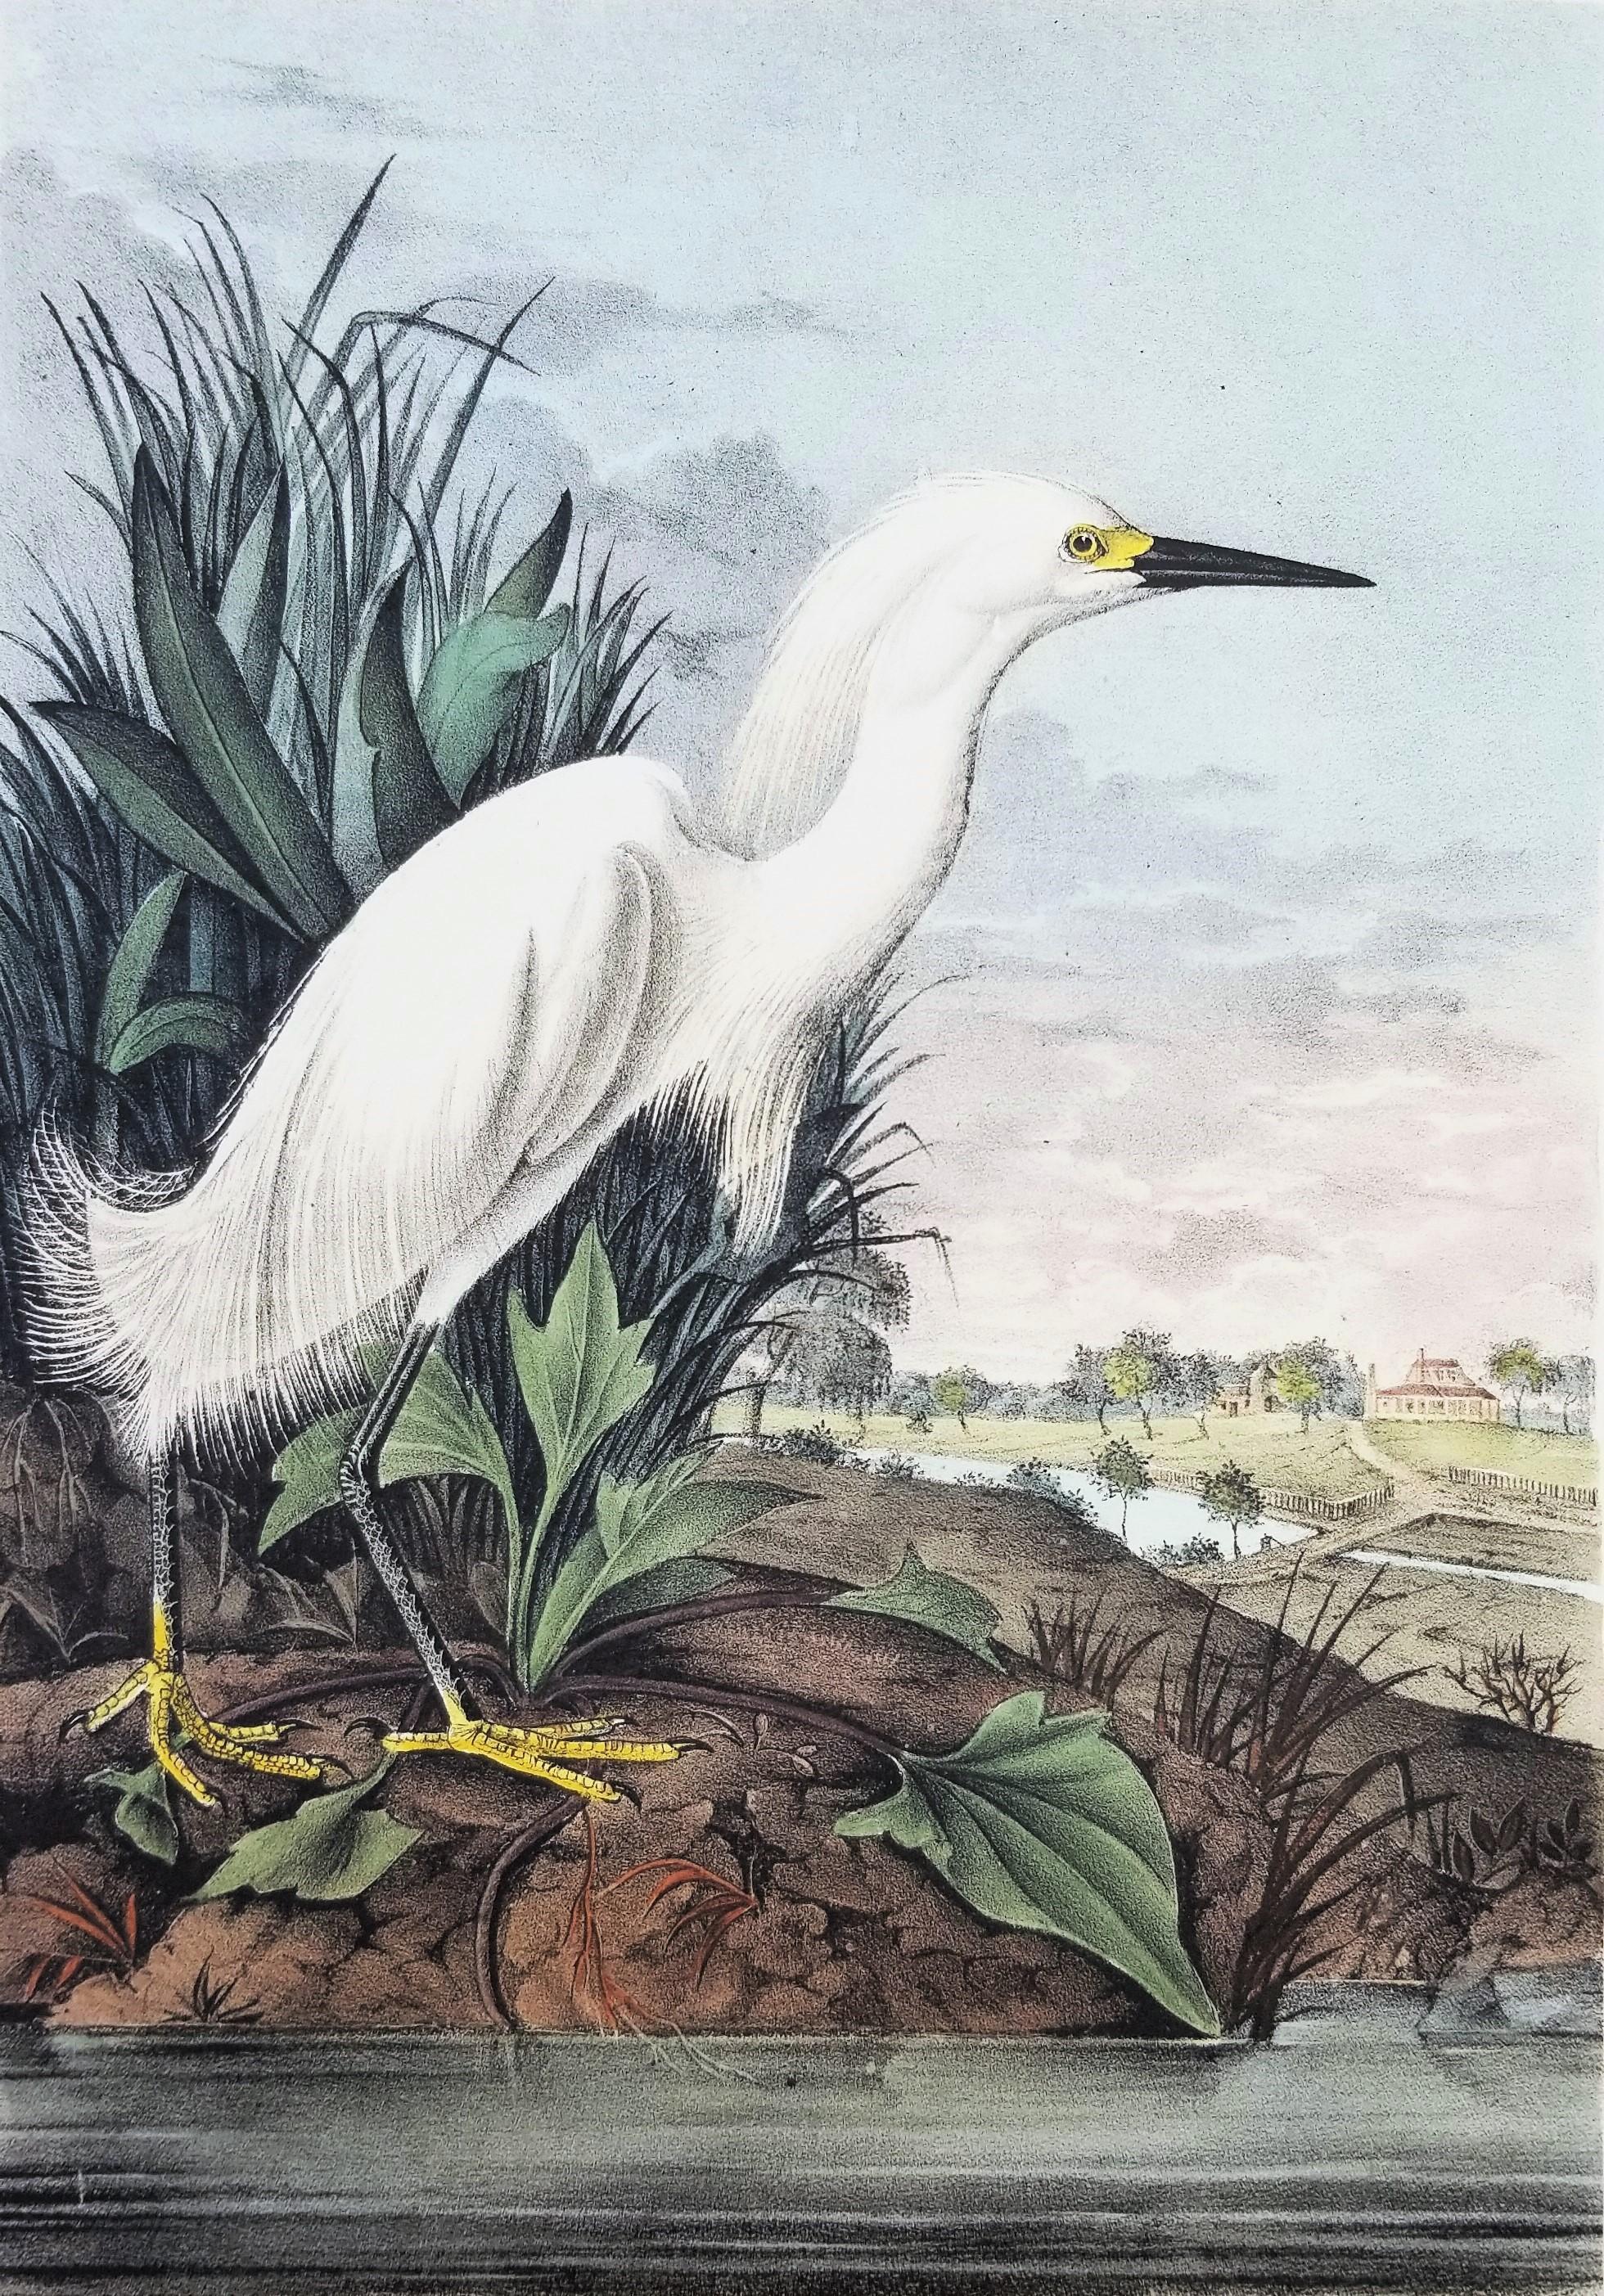 Artist: John James Audubon (American, 1785-1851)
Title: "Snowy Heron" (Plate 374, No. 75)
Portfolio: The Birds of America, First Royal Octavo Edition
Year: 1840-1844
Medium: Original Hand-Colored Lithograph on wove paper
Limited edition: approx.